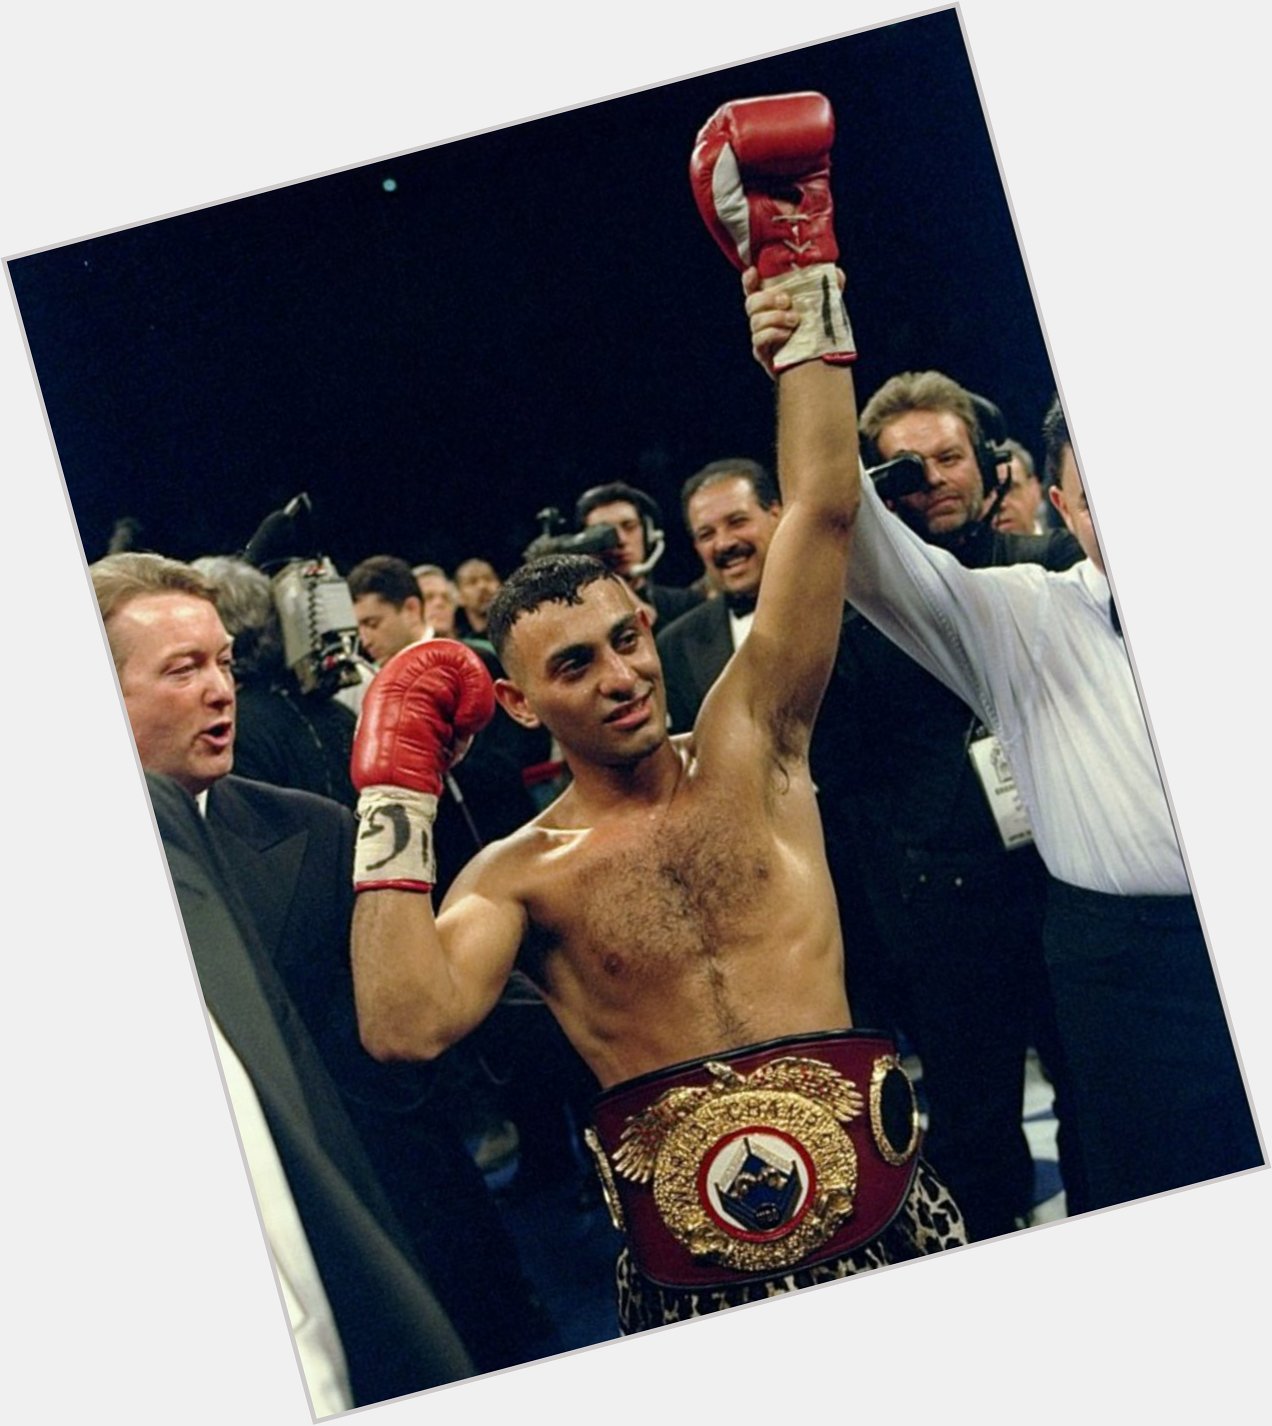 Happy birthday to the former World Featherweight and Lineal Champion Prince Naseem Hamed   